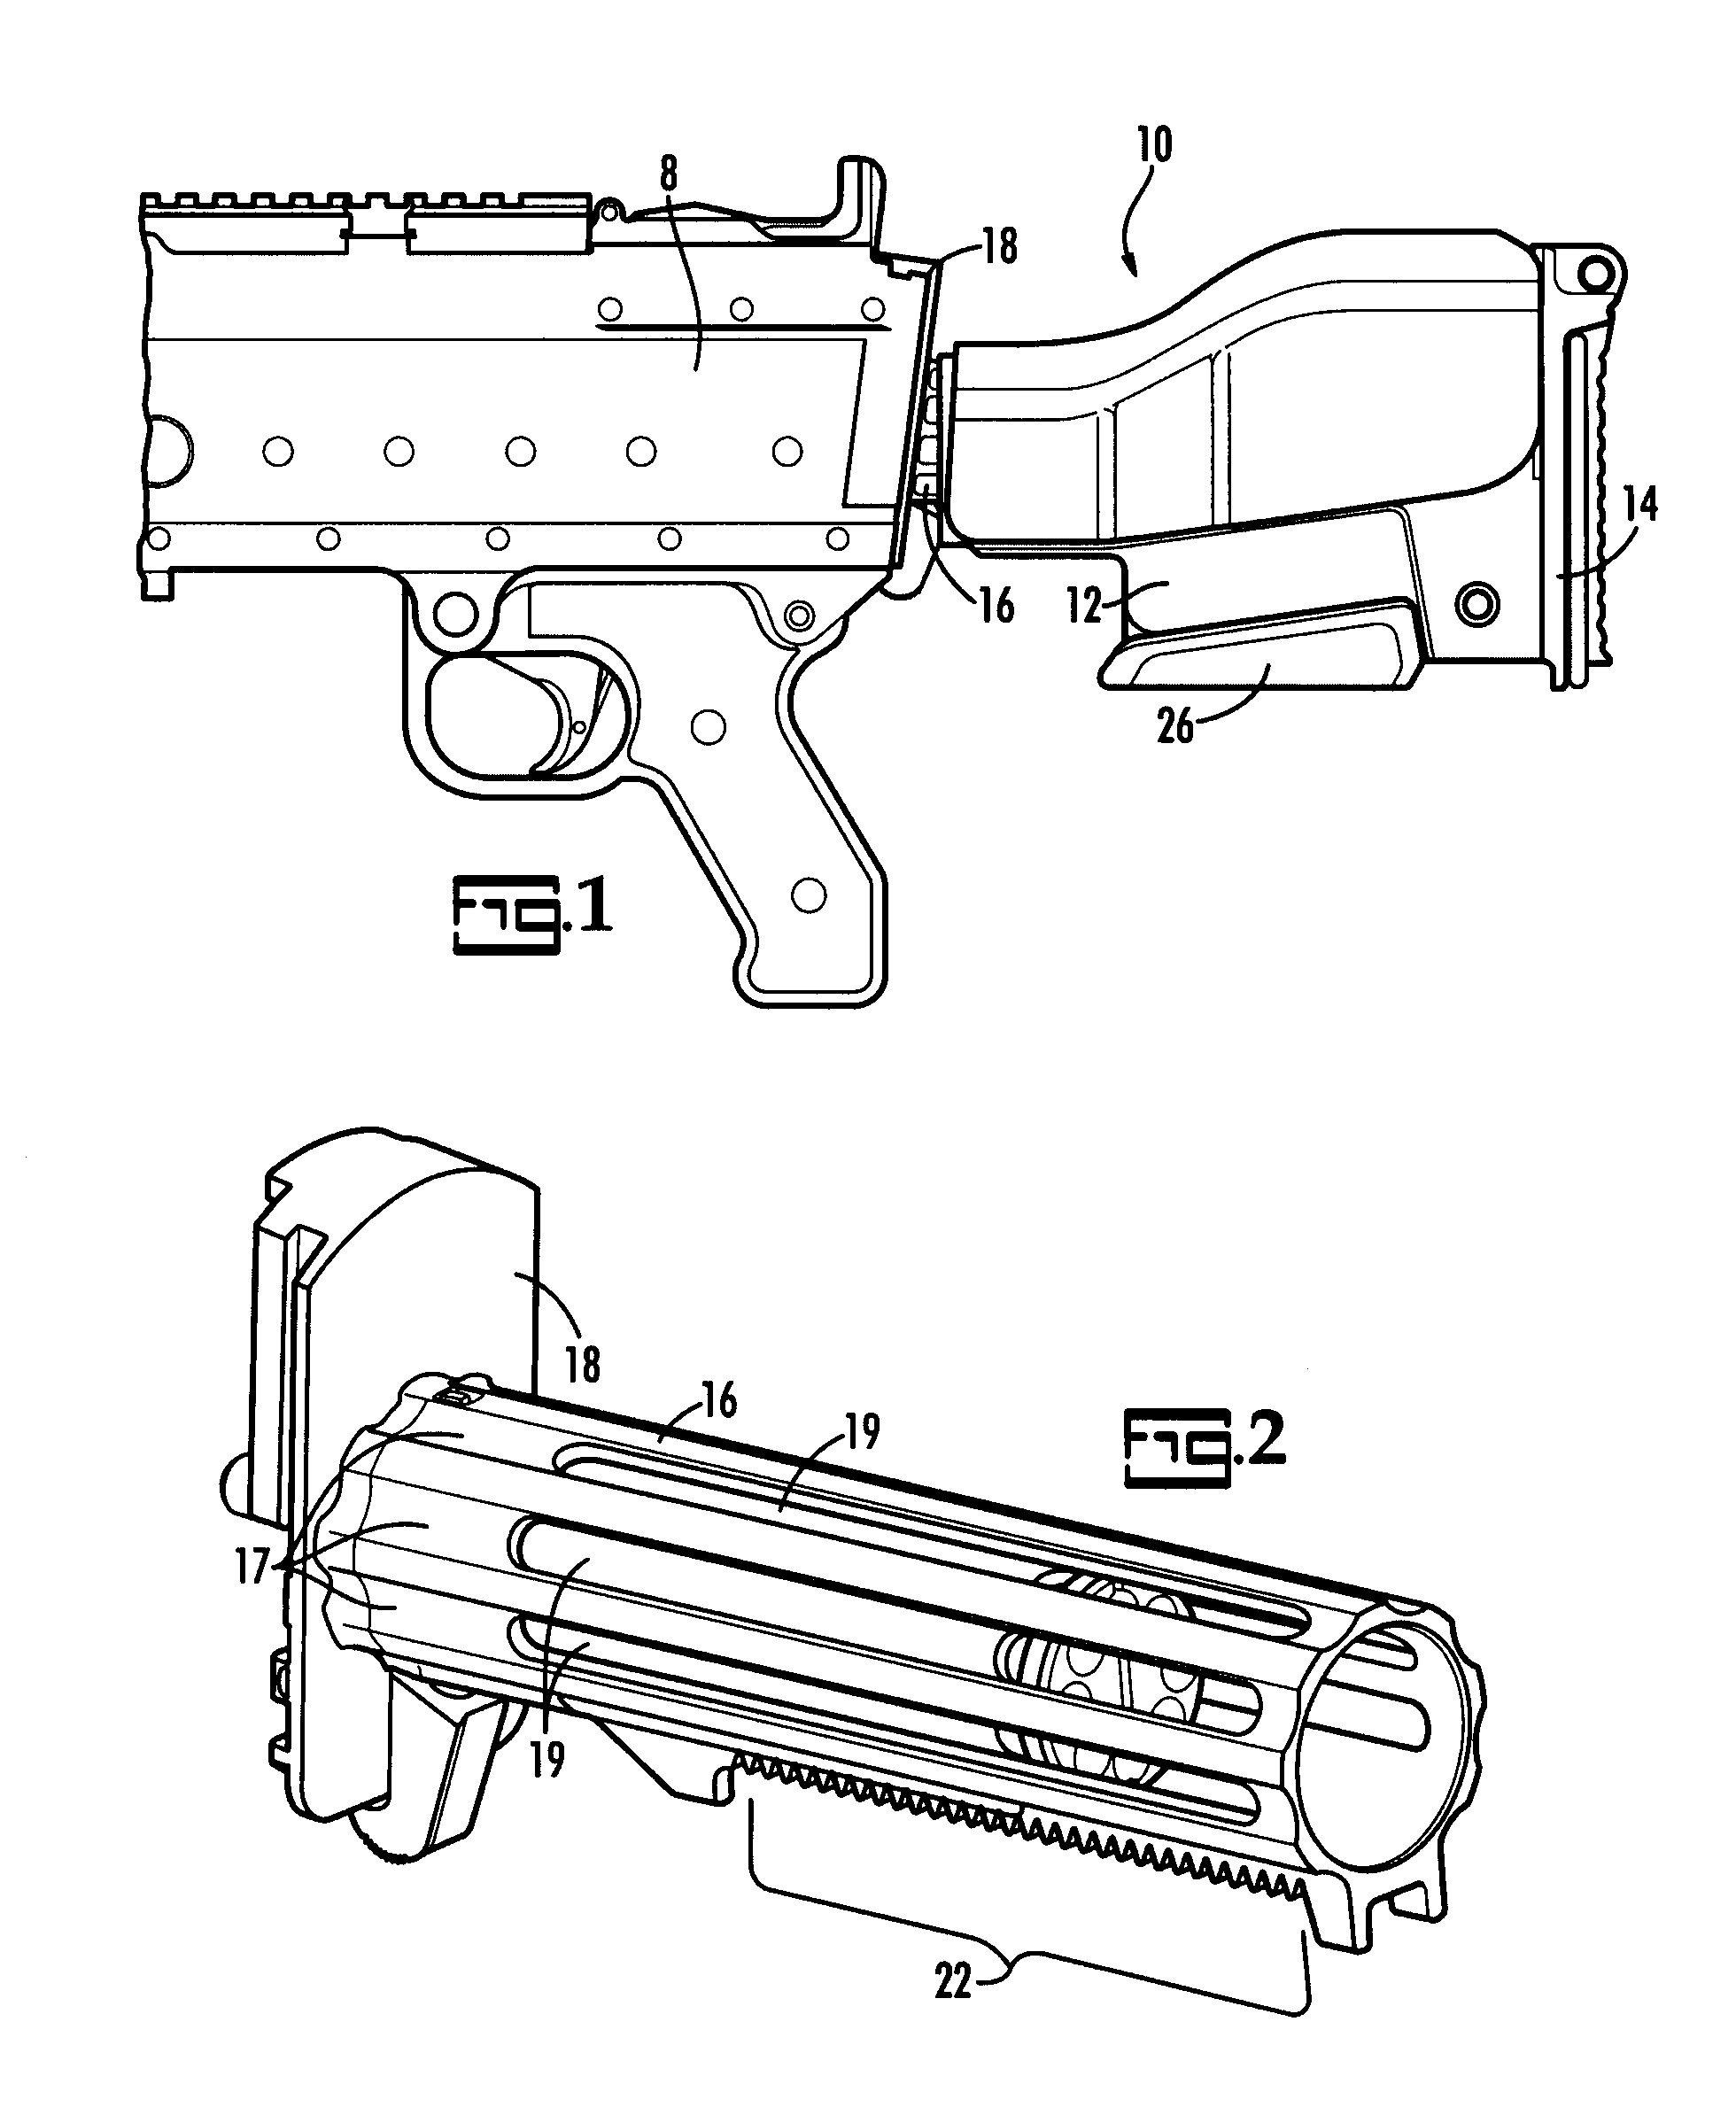 Adjustable butt stock assembly